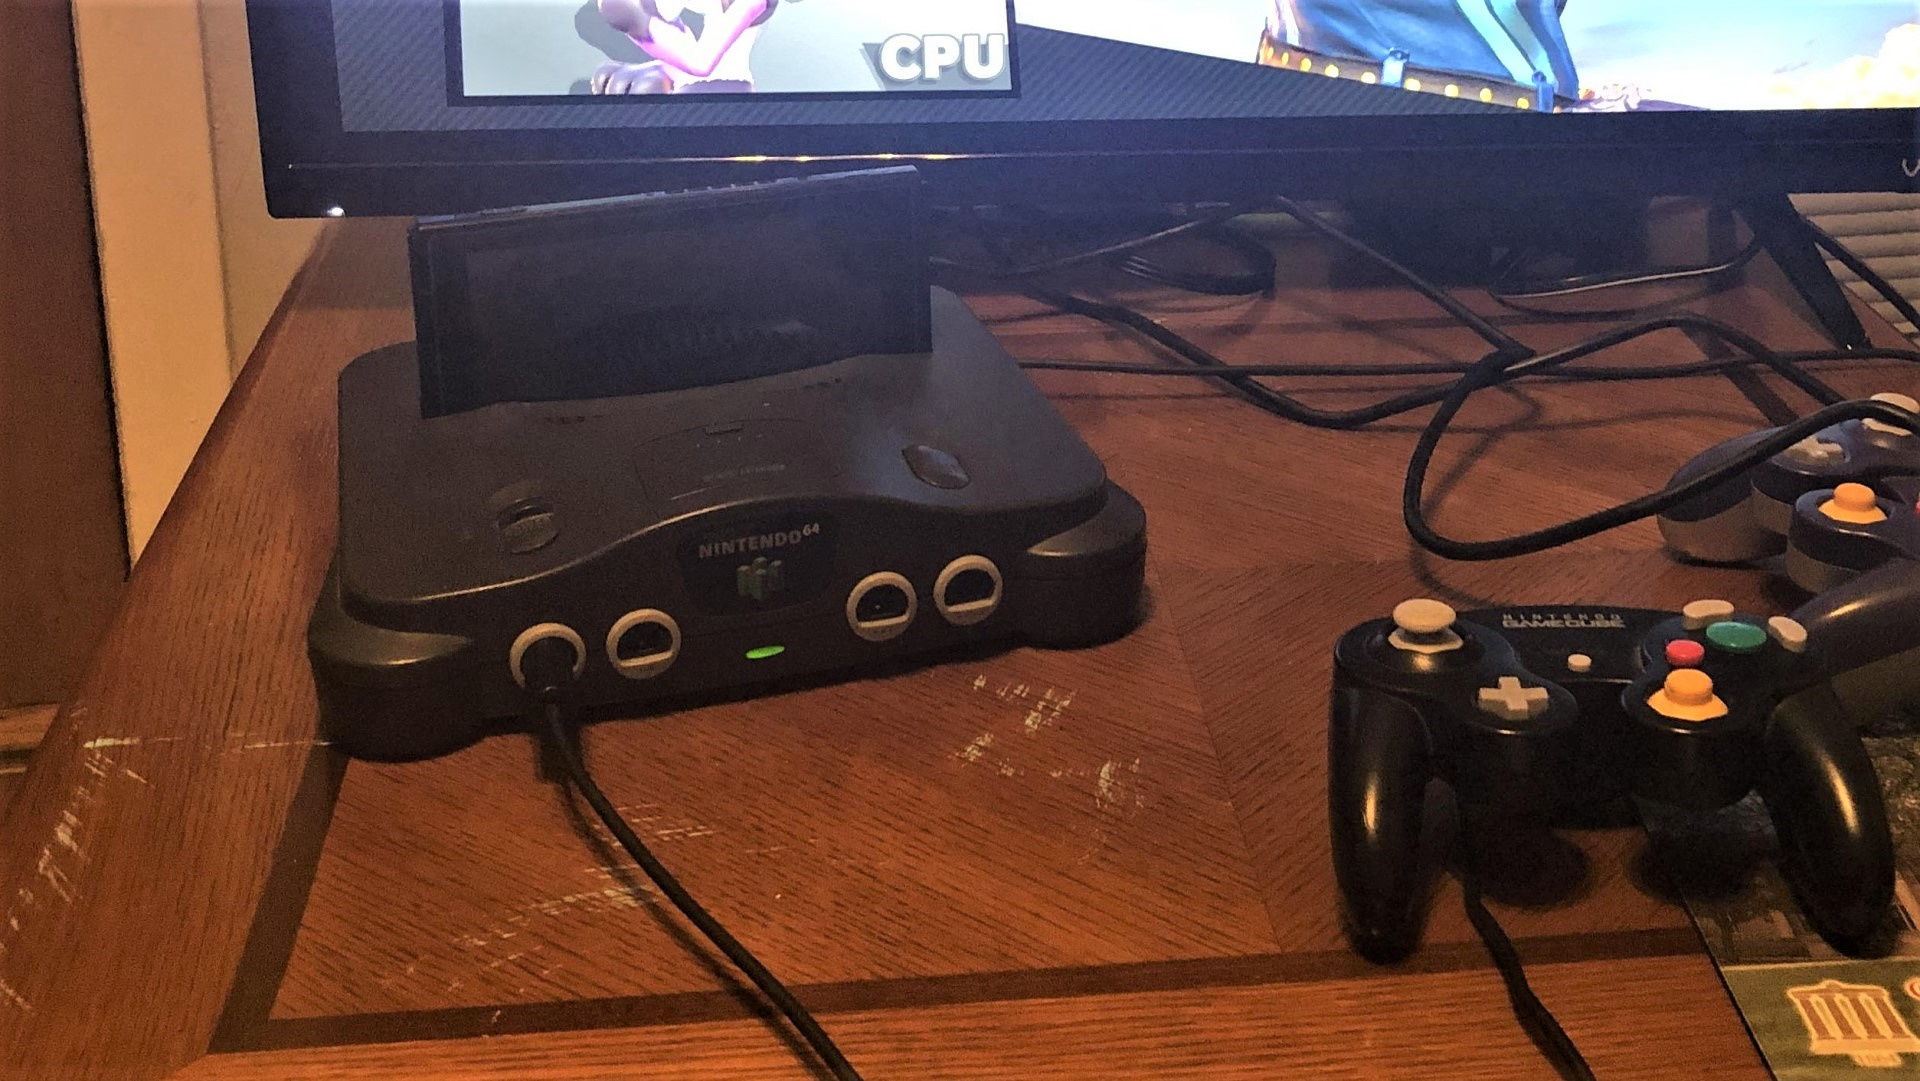 nintendo 64 controller adapter for switch